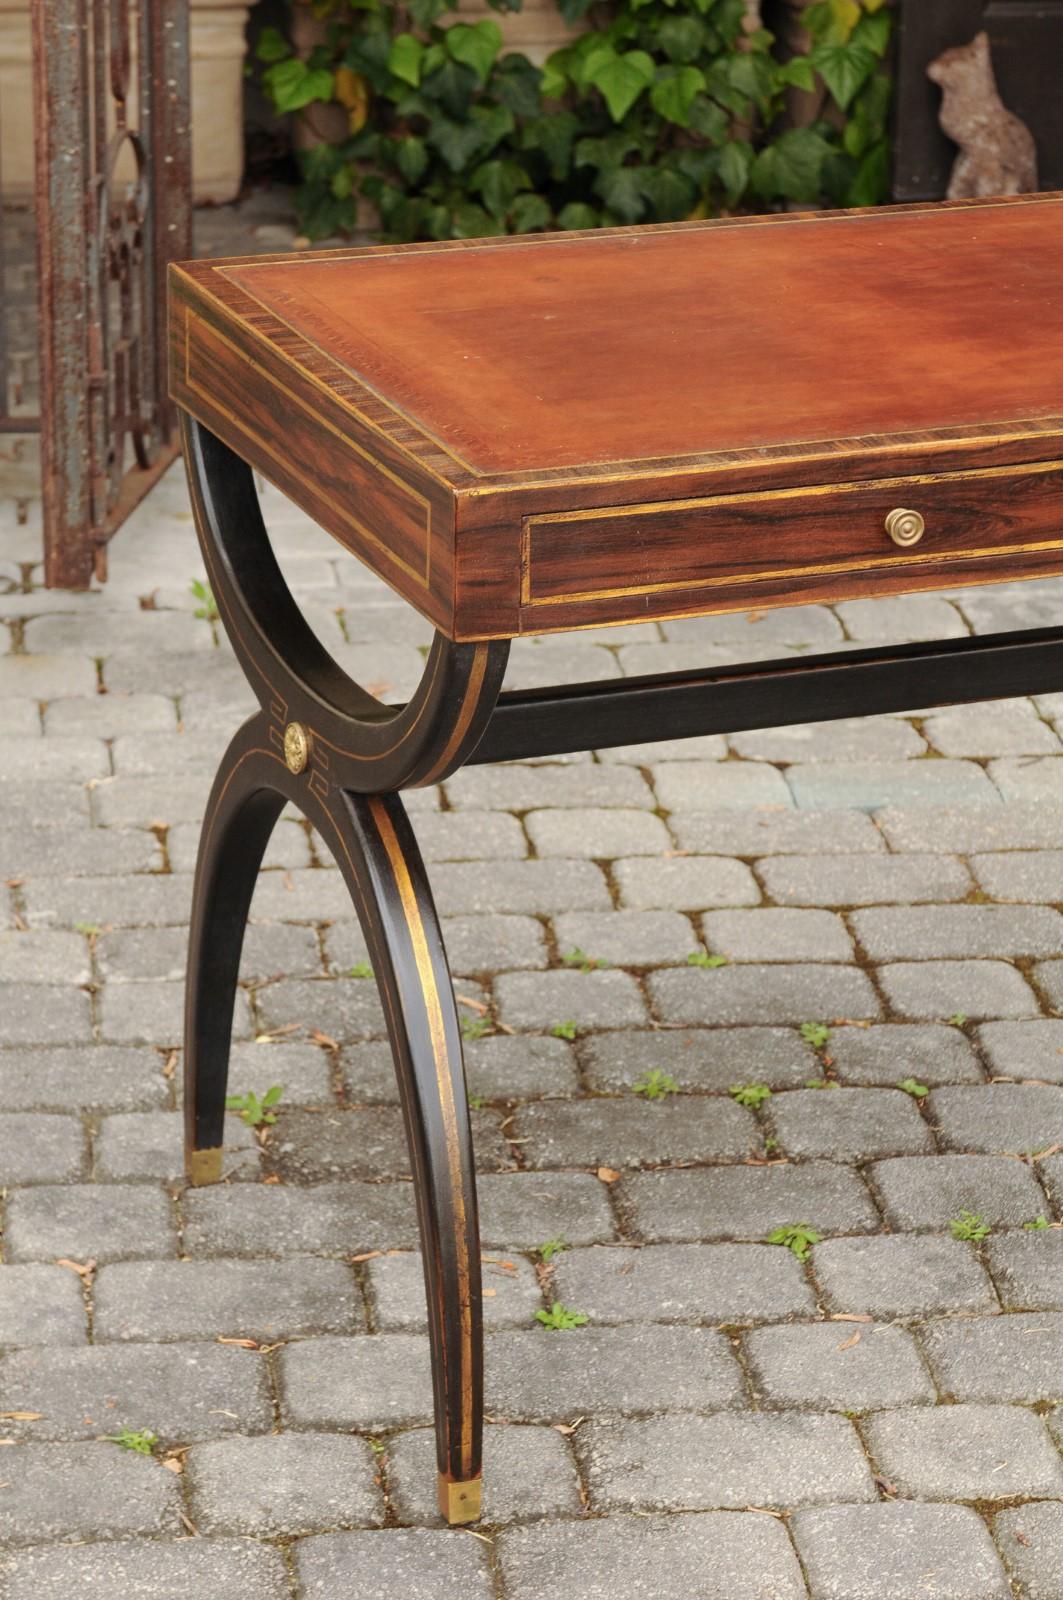 20th Century English Regency Style Black X-Form Base Desk with Leather Top and Gilt Accents